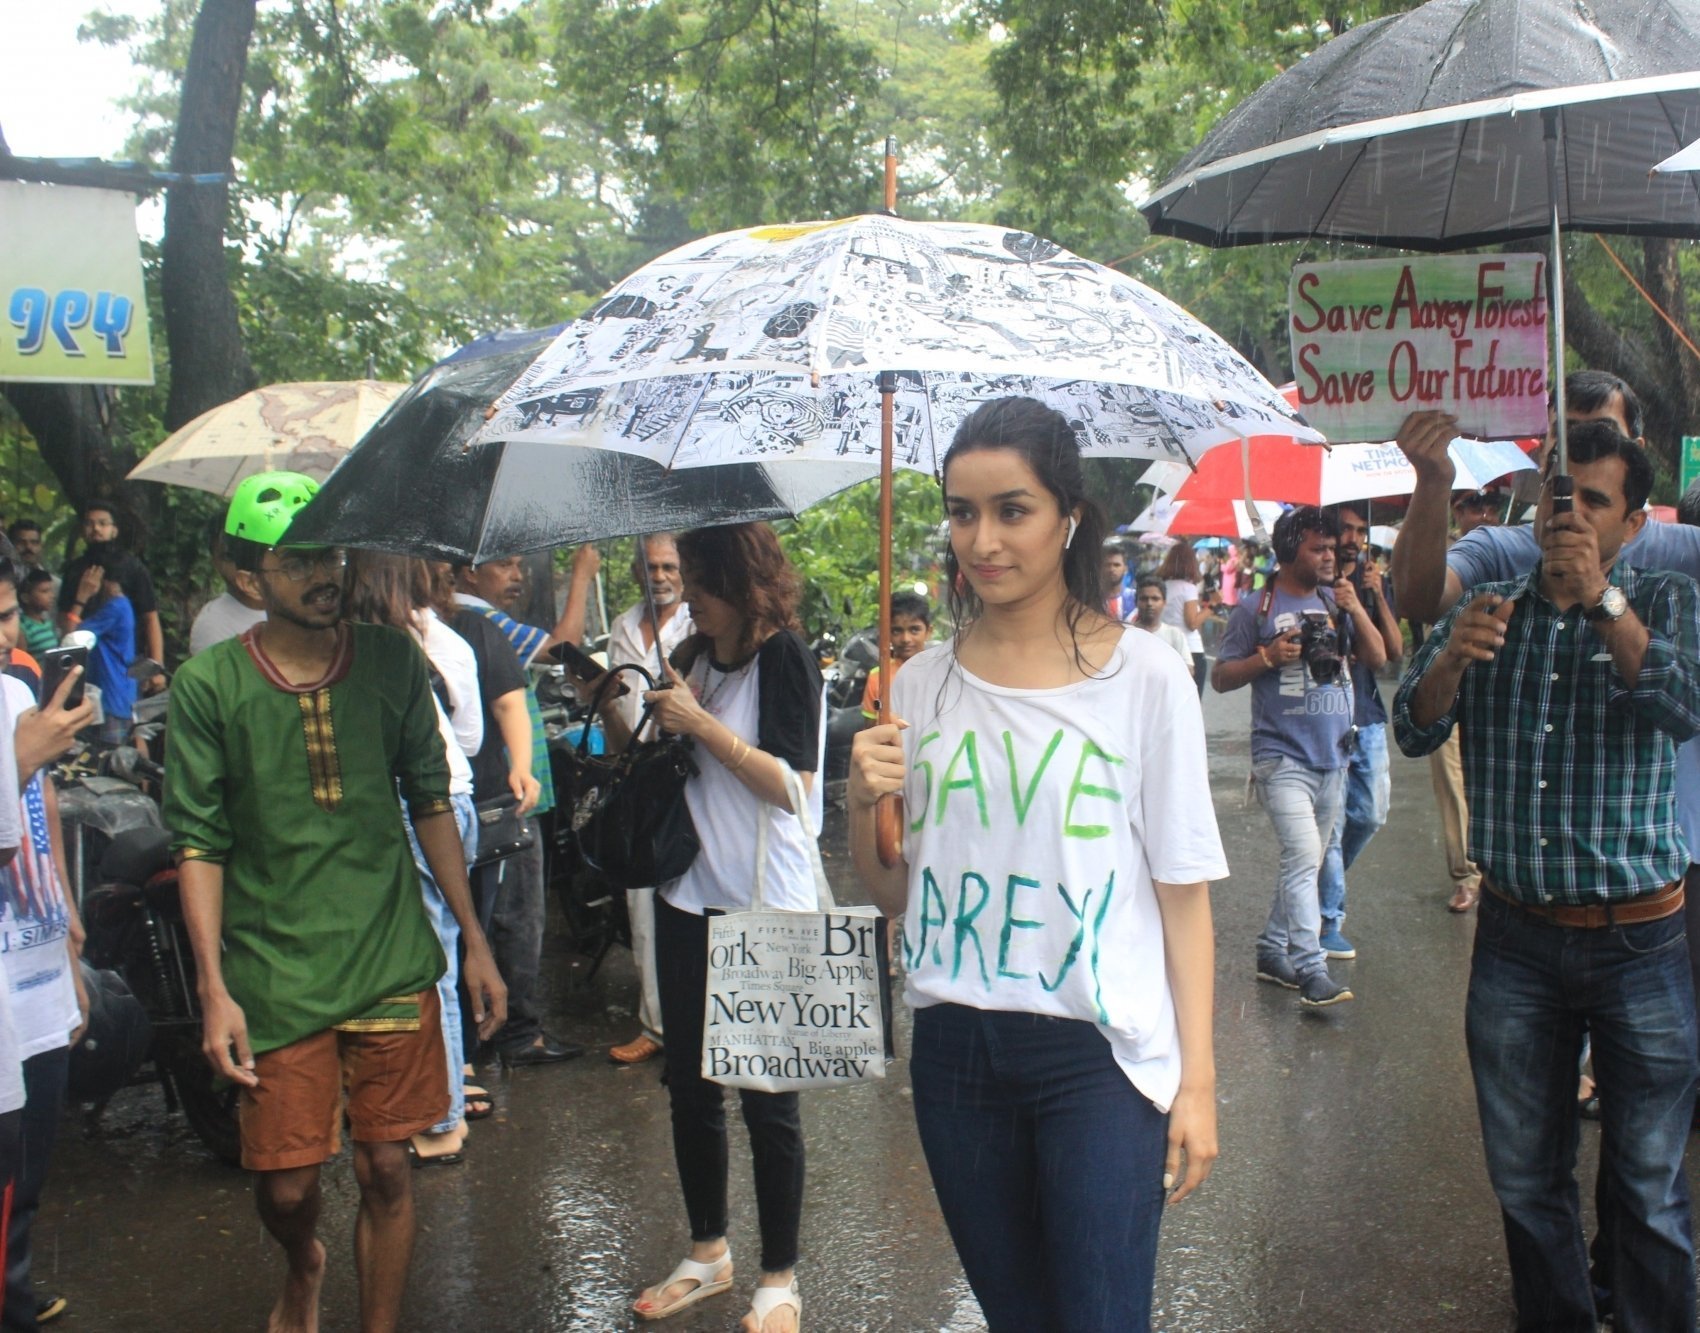 Shraddha Kapoor Protests Against Cutting Of Trees In Aarey forest